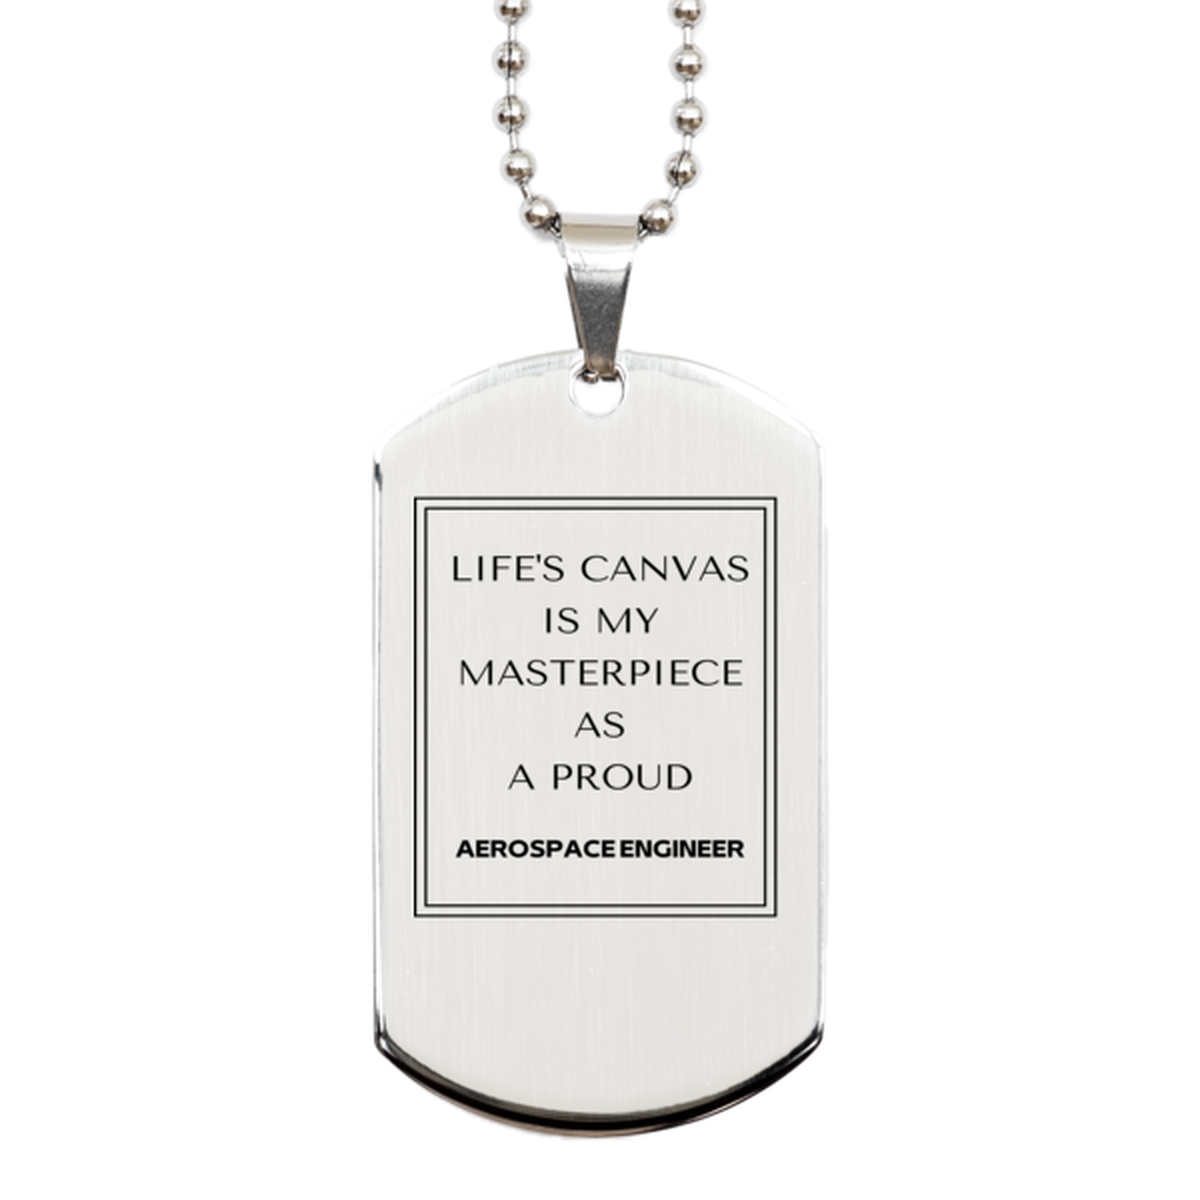 Proud Aerospace Engineer Gifts, Life's canvas is my masterpiece, Epic Birthday Christmas Unique Silver Dog Tag For Aerospace Engineer, Coworkers, Men, Women, Friends